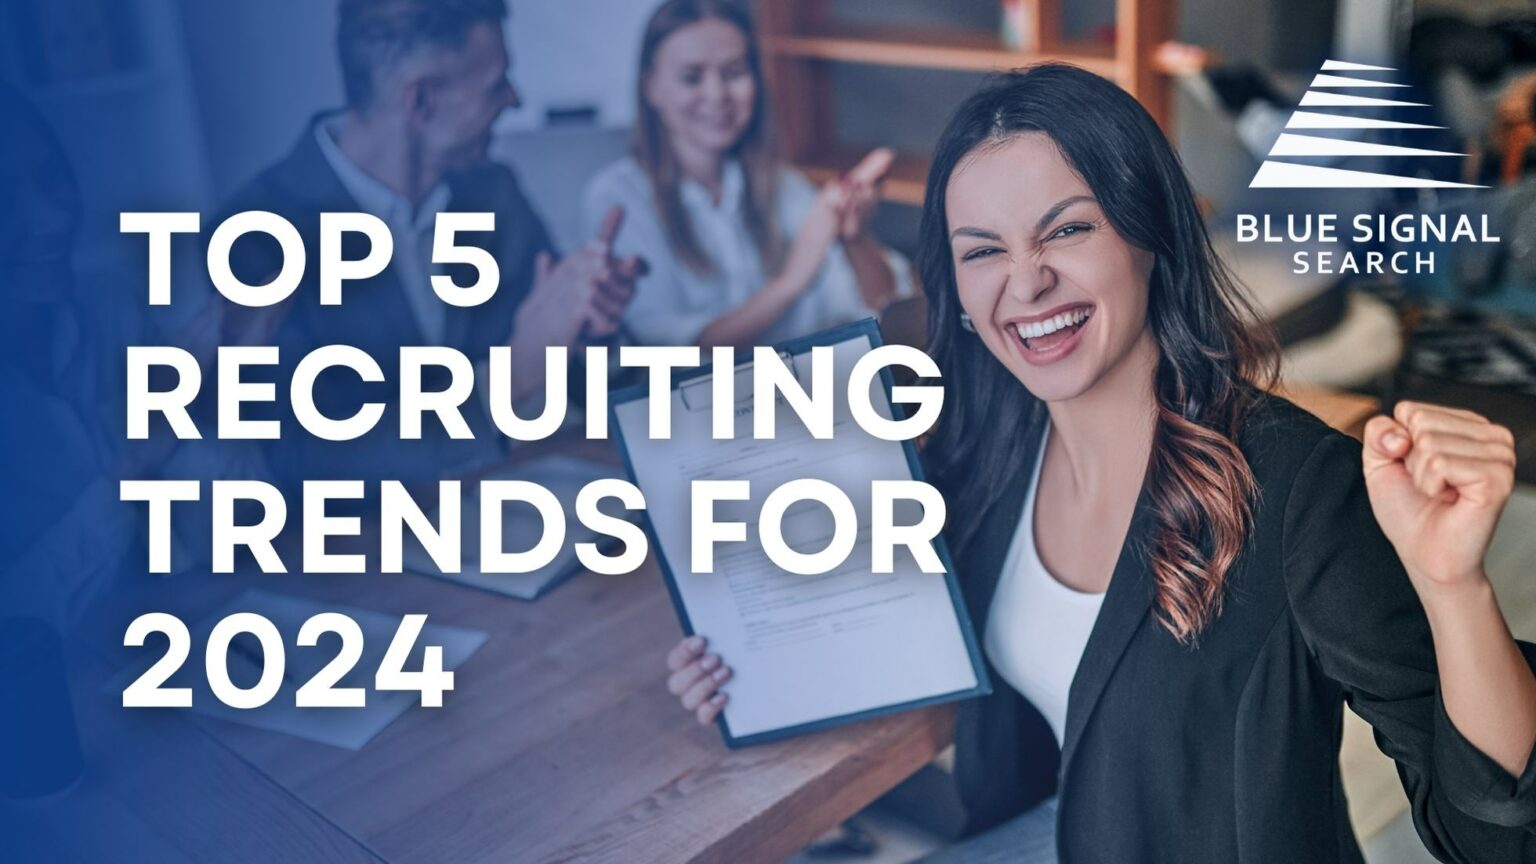 Top 5 Recruiting Trends for 2024 Blue Signal Search